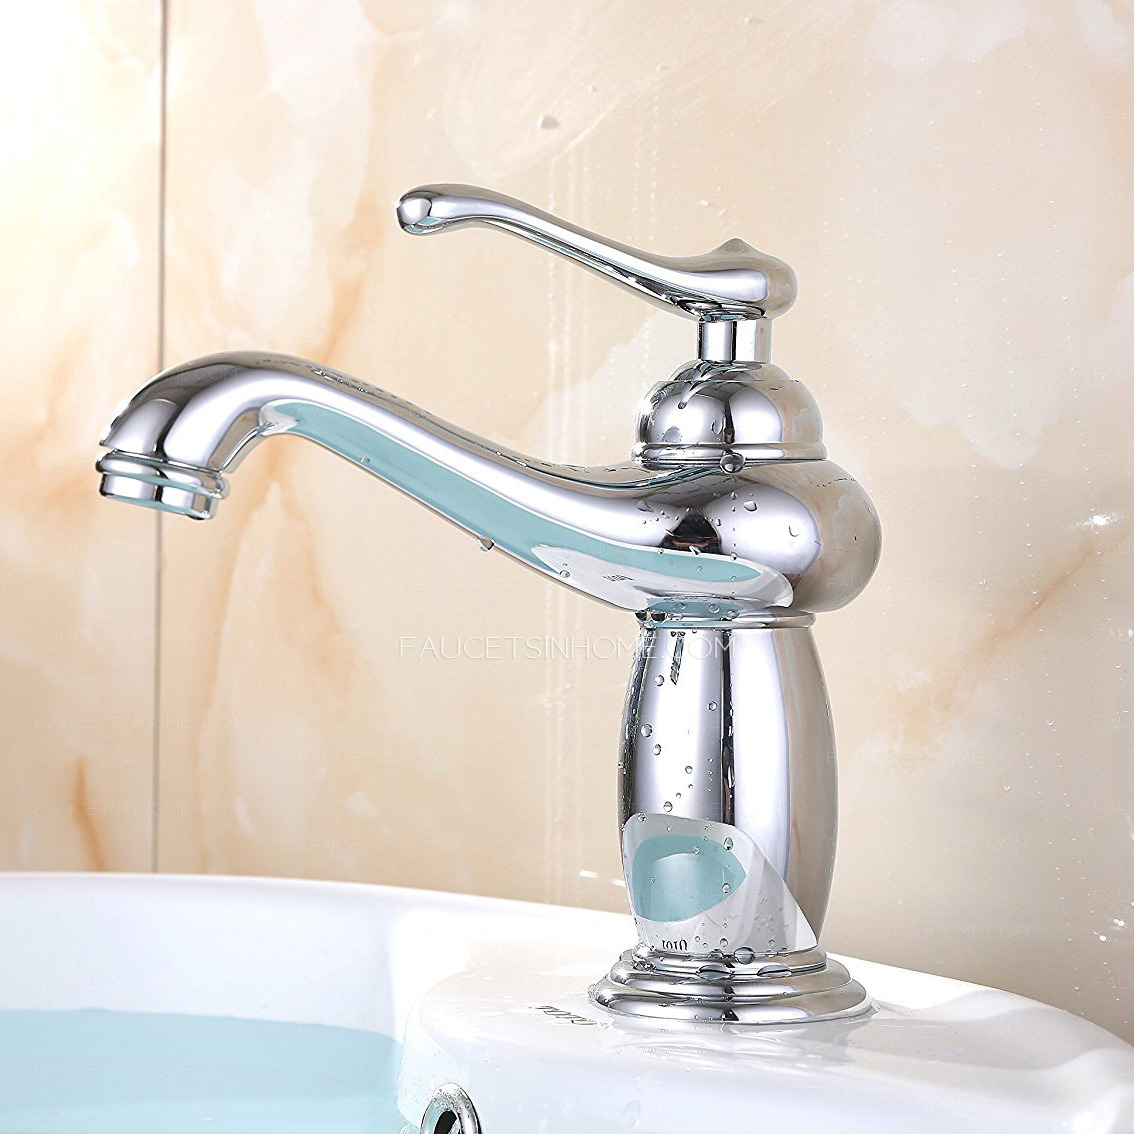 Single Handle Bathroom Hot And Cold Water Basin Faucet